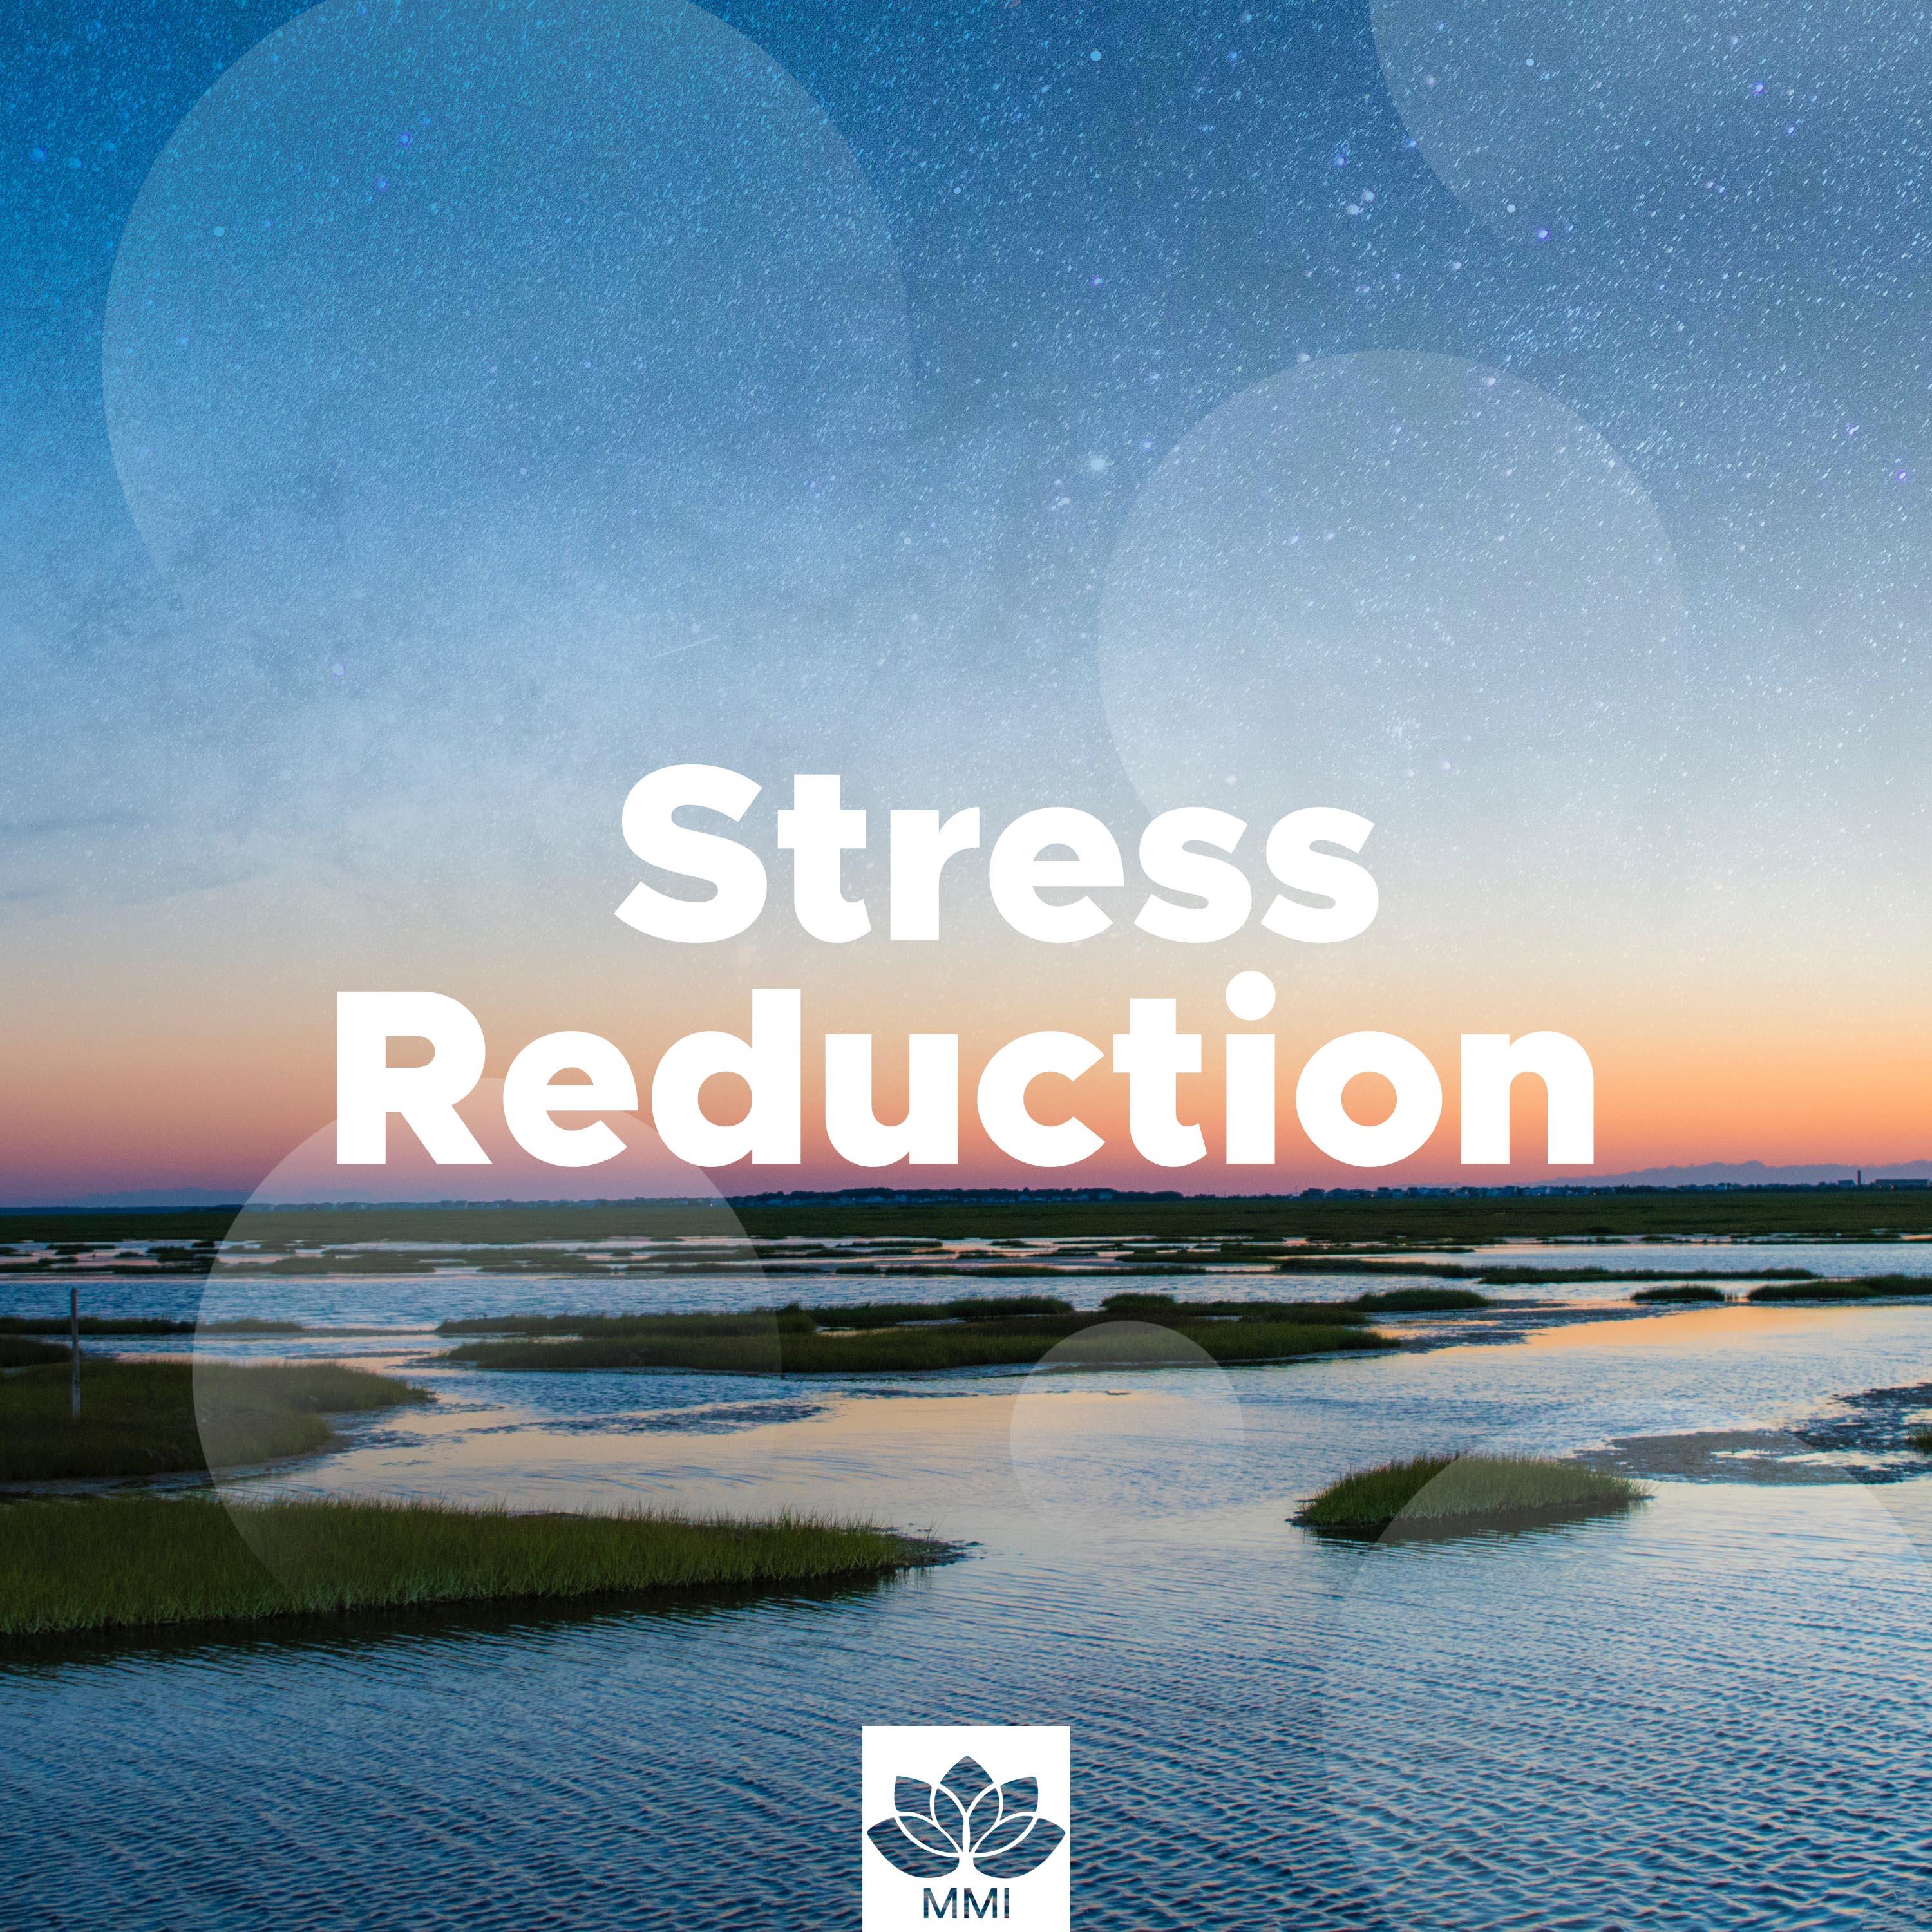 Stress Reduction - Relaxing Paradise Music for a Healthy Lifestyle